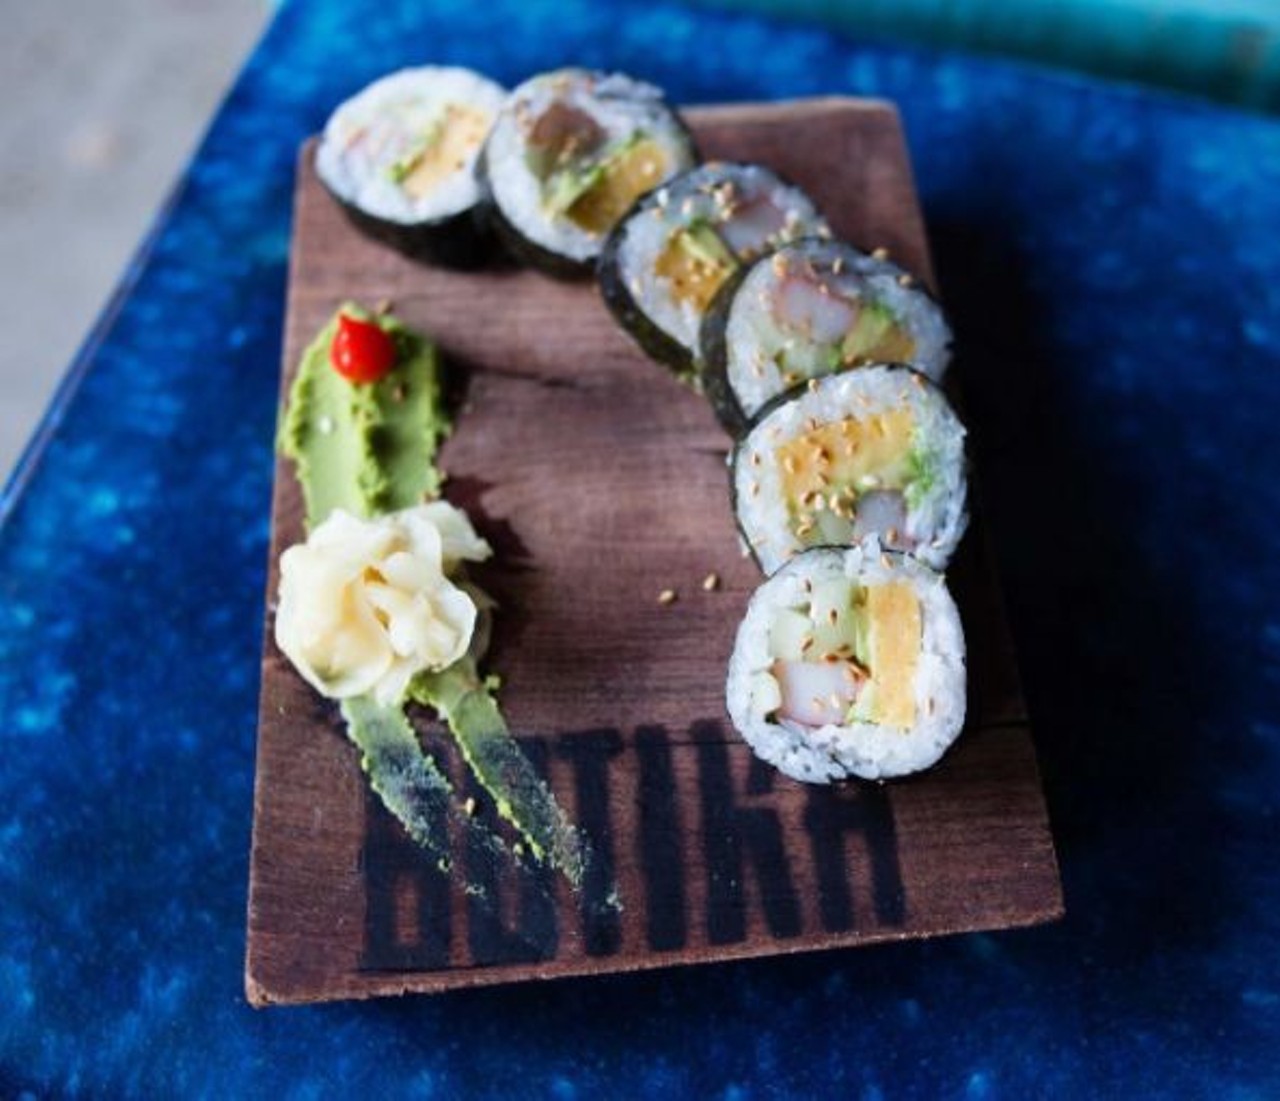 Botika
The Pearl, 303 Pearl Pkwy #111, (210) 670-7684
The Nikkei restaurant brings Japanese and Peruvian flavors to the Pearl and should be on every San Antonian's bucket list. 
Photo via Instagram, botikapearl